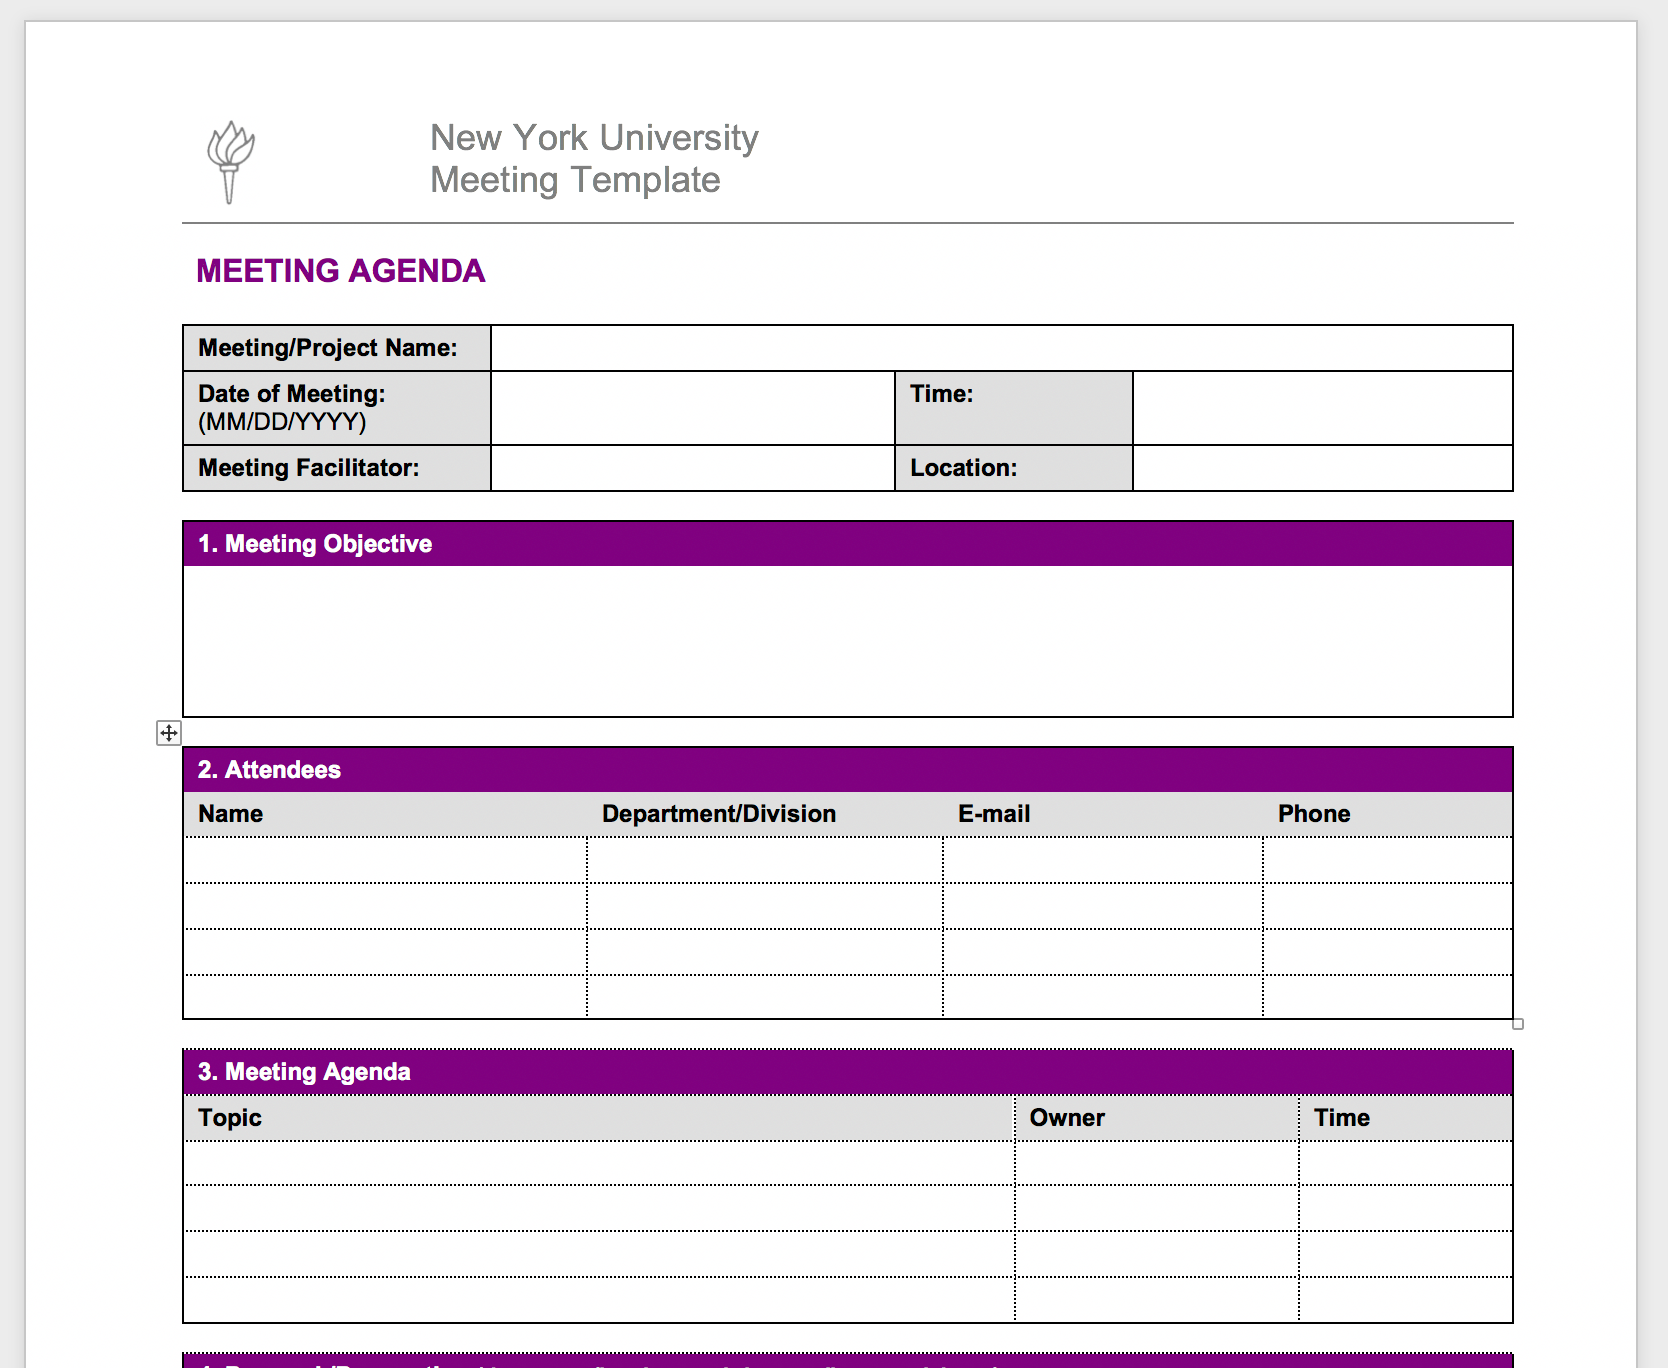 Meeting Notes Sample Template from knowtworthy.com